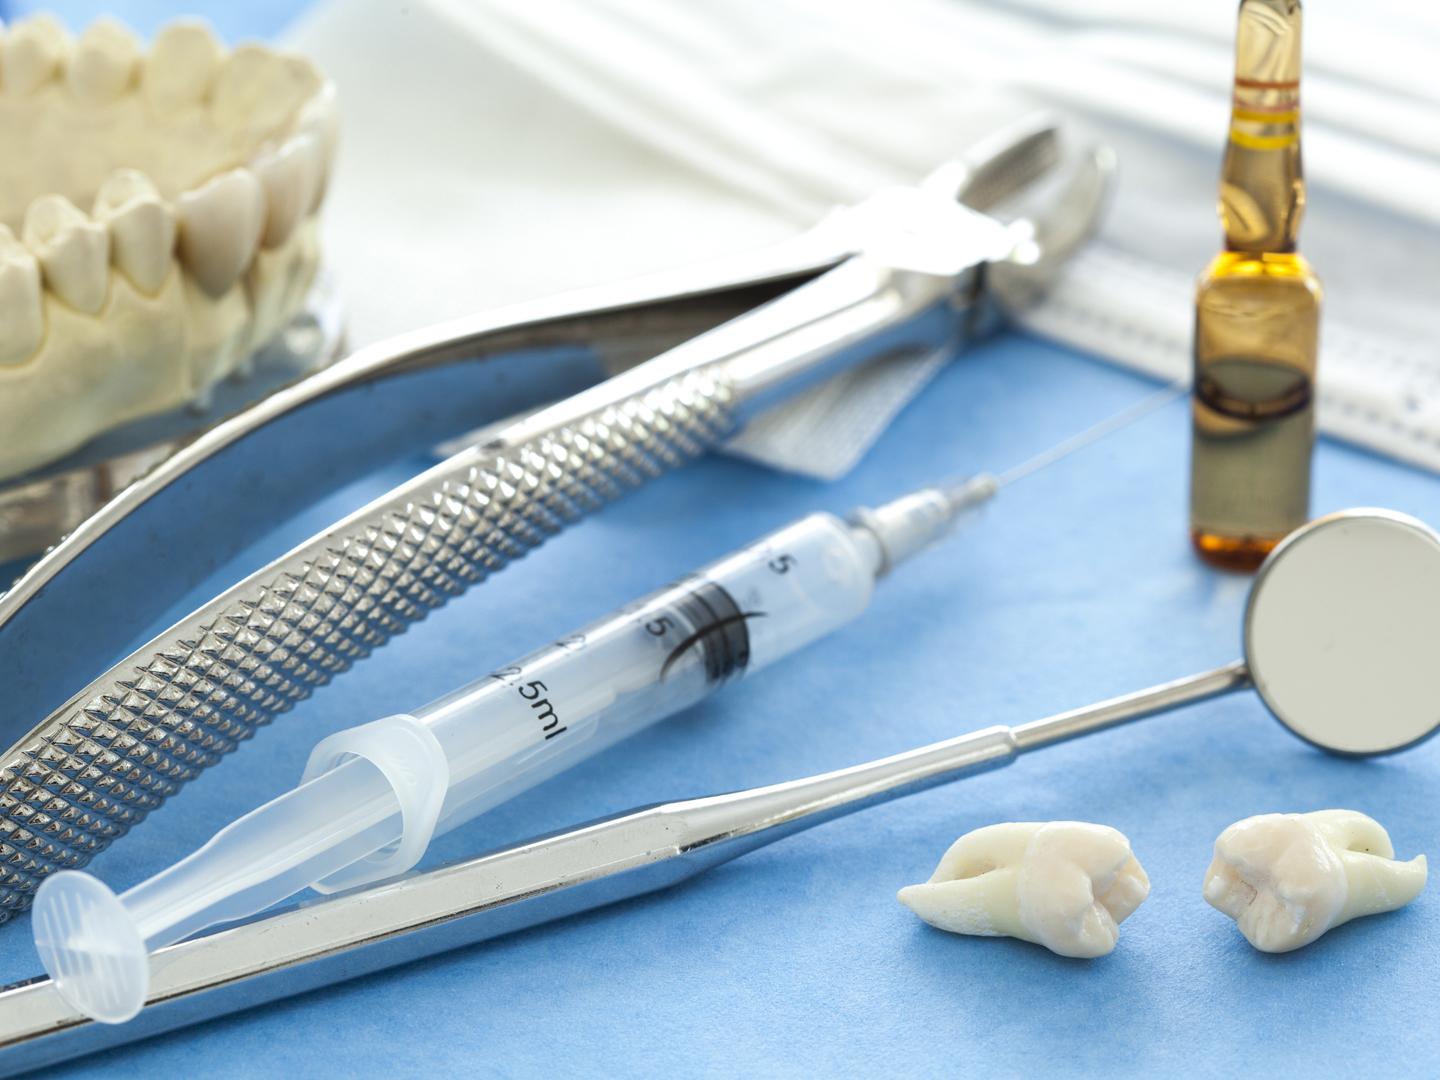 Dental equipment and surgery